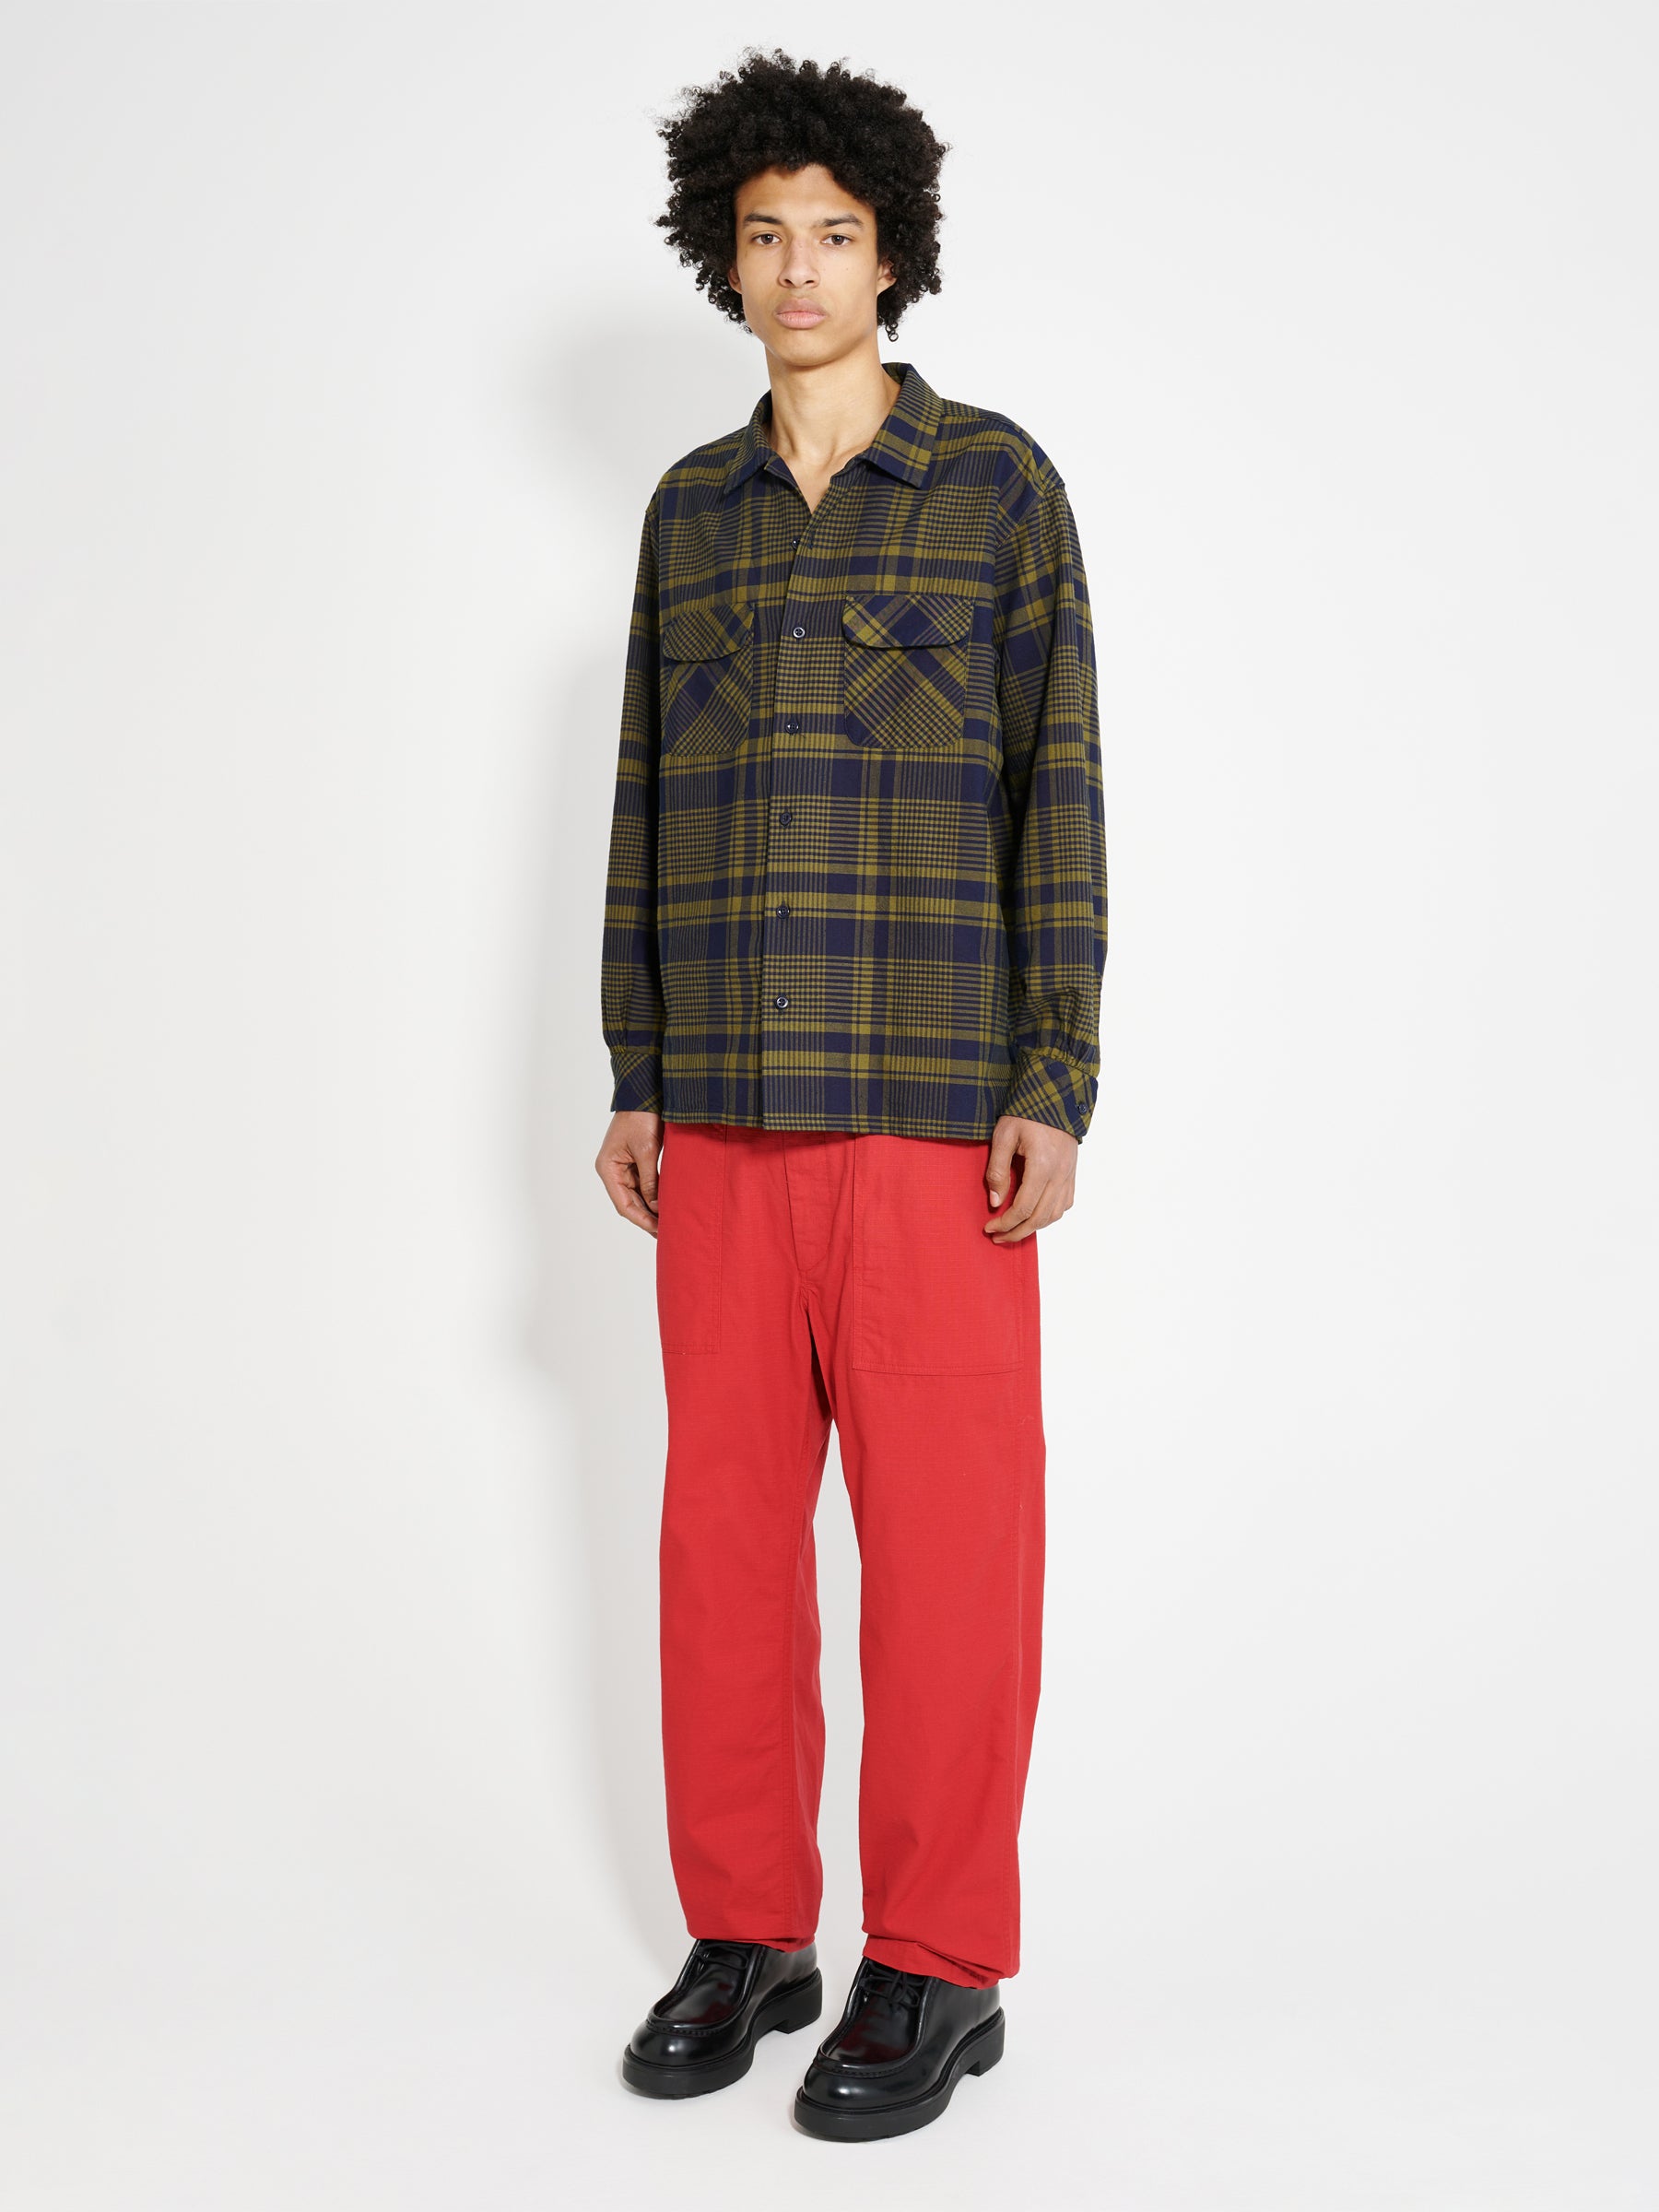 Engineered Garments Fatigue Pant Red Cotton Ripstop